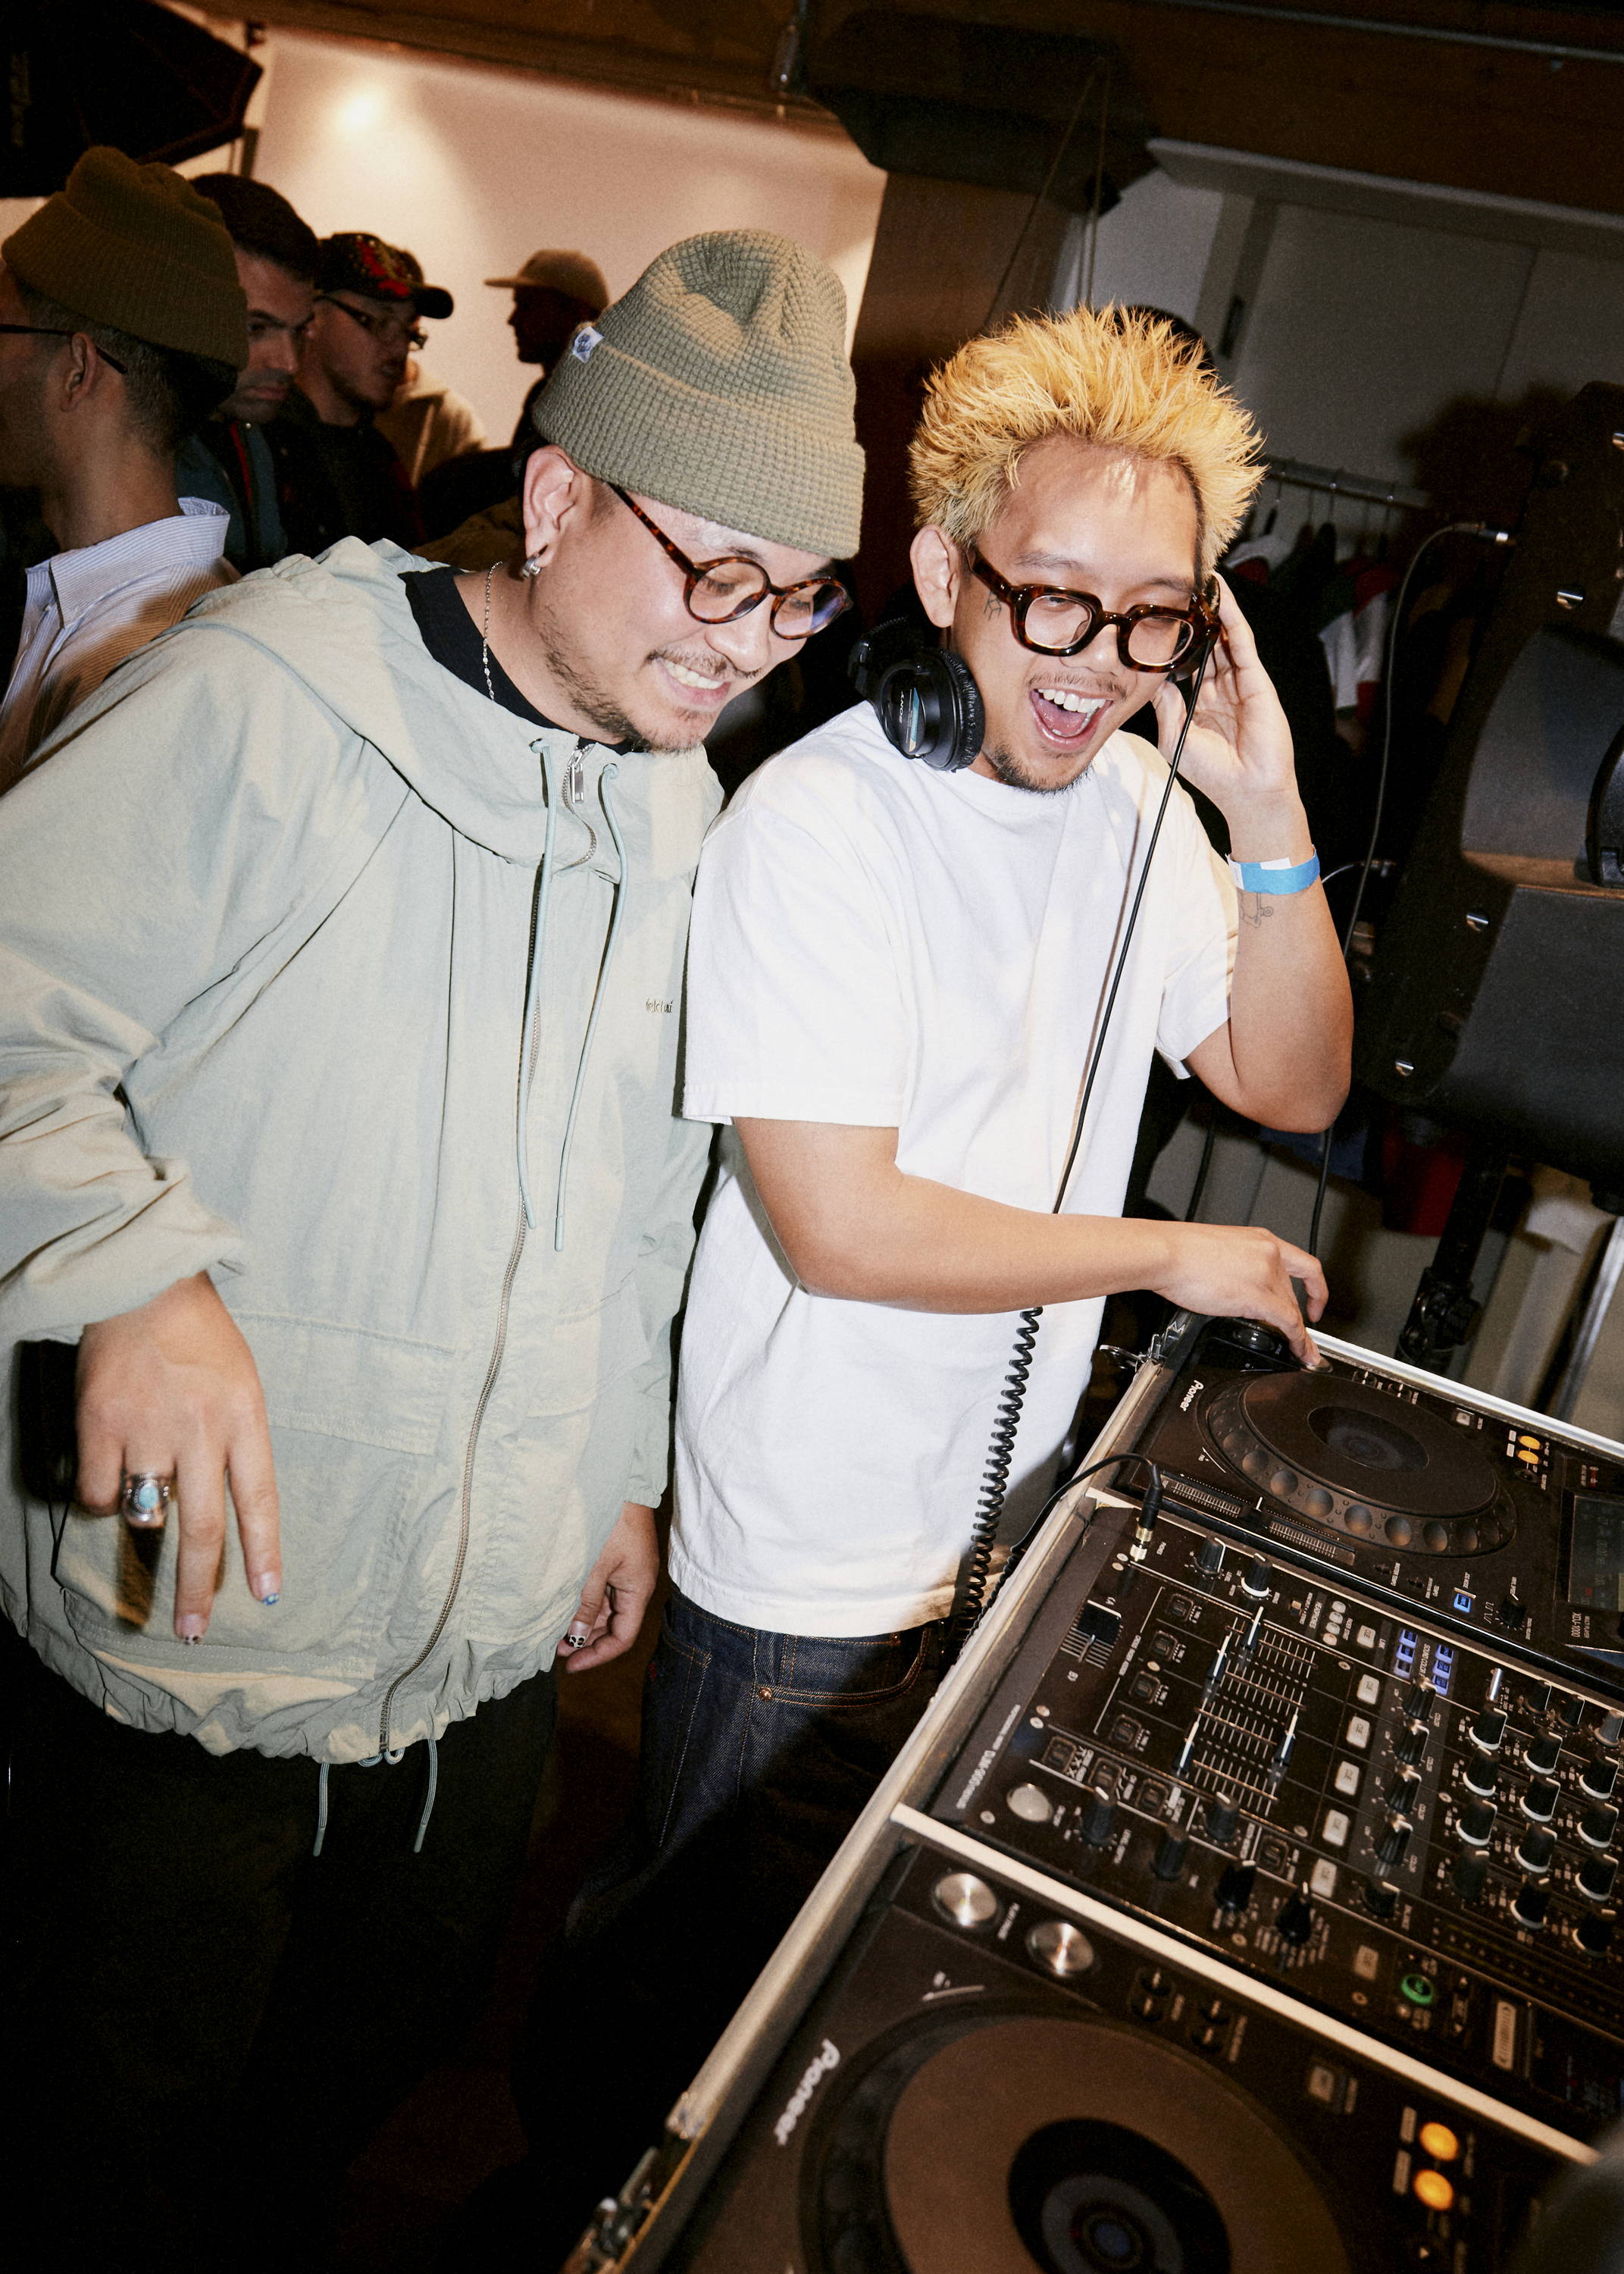 Event Recap: Re-creation x Reclaimed - Nike Re-Creation w/ Reclaimed Inc.